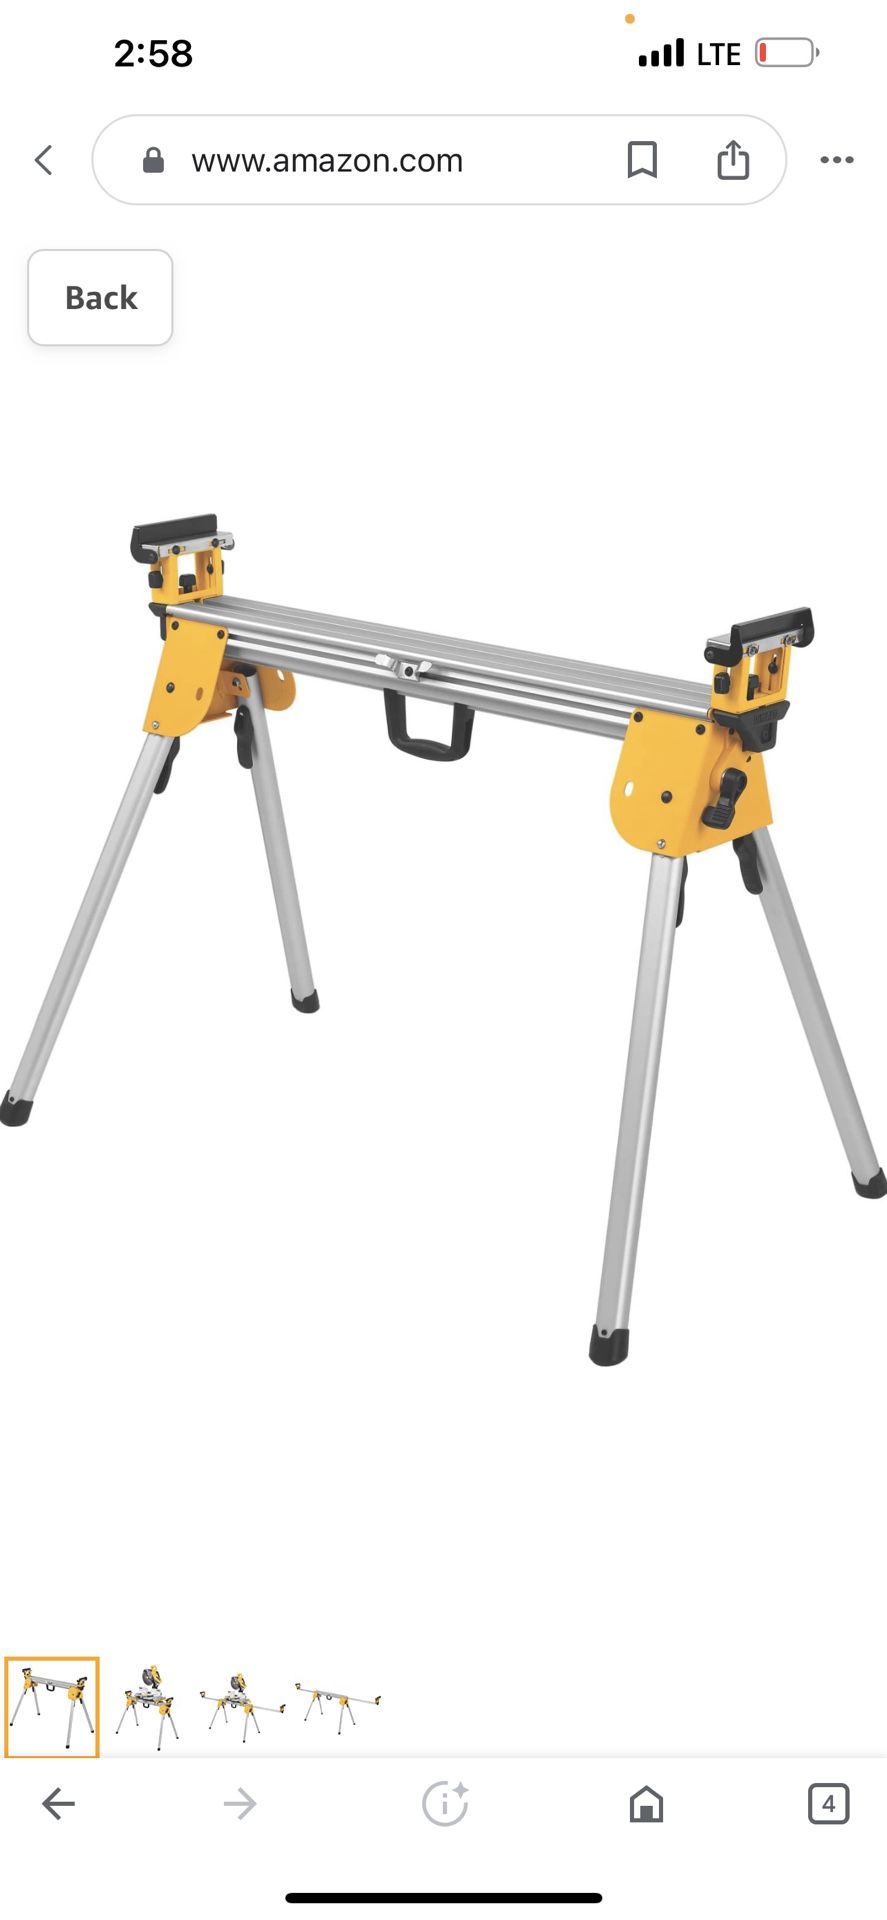 DEWALT Miter Saw Stand, Collapsible and Portable, 40” Beam, Extends up to 10 ft, Holds up to 500 lbs